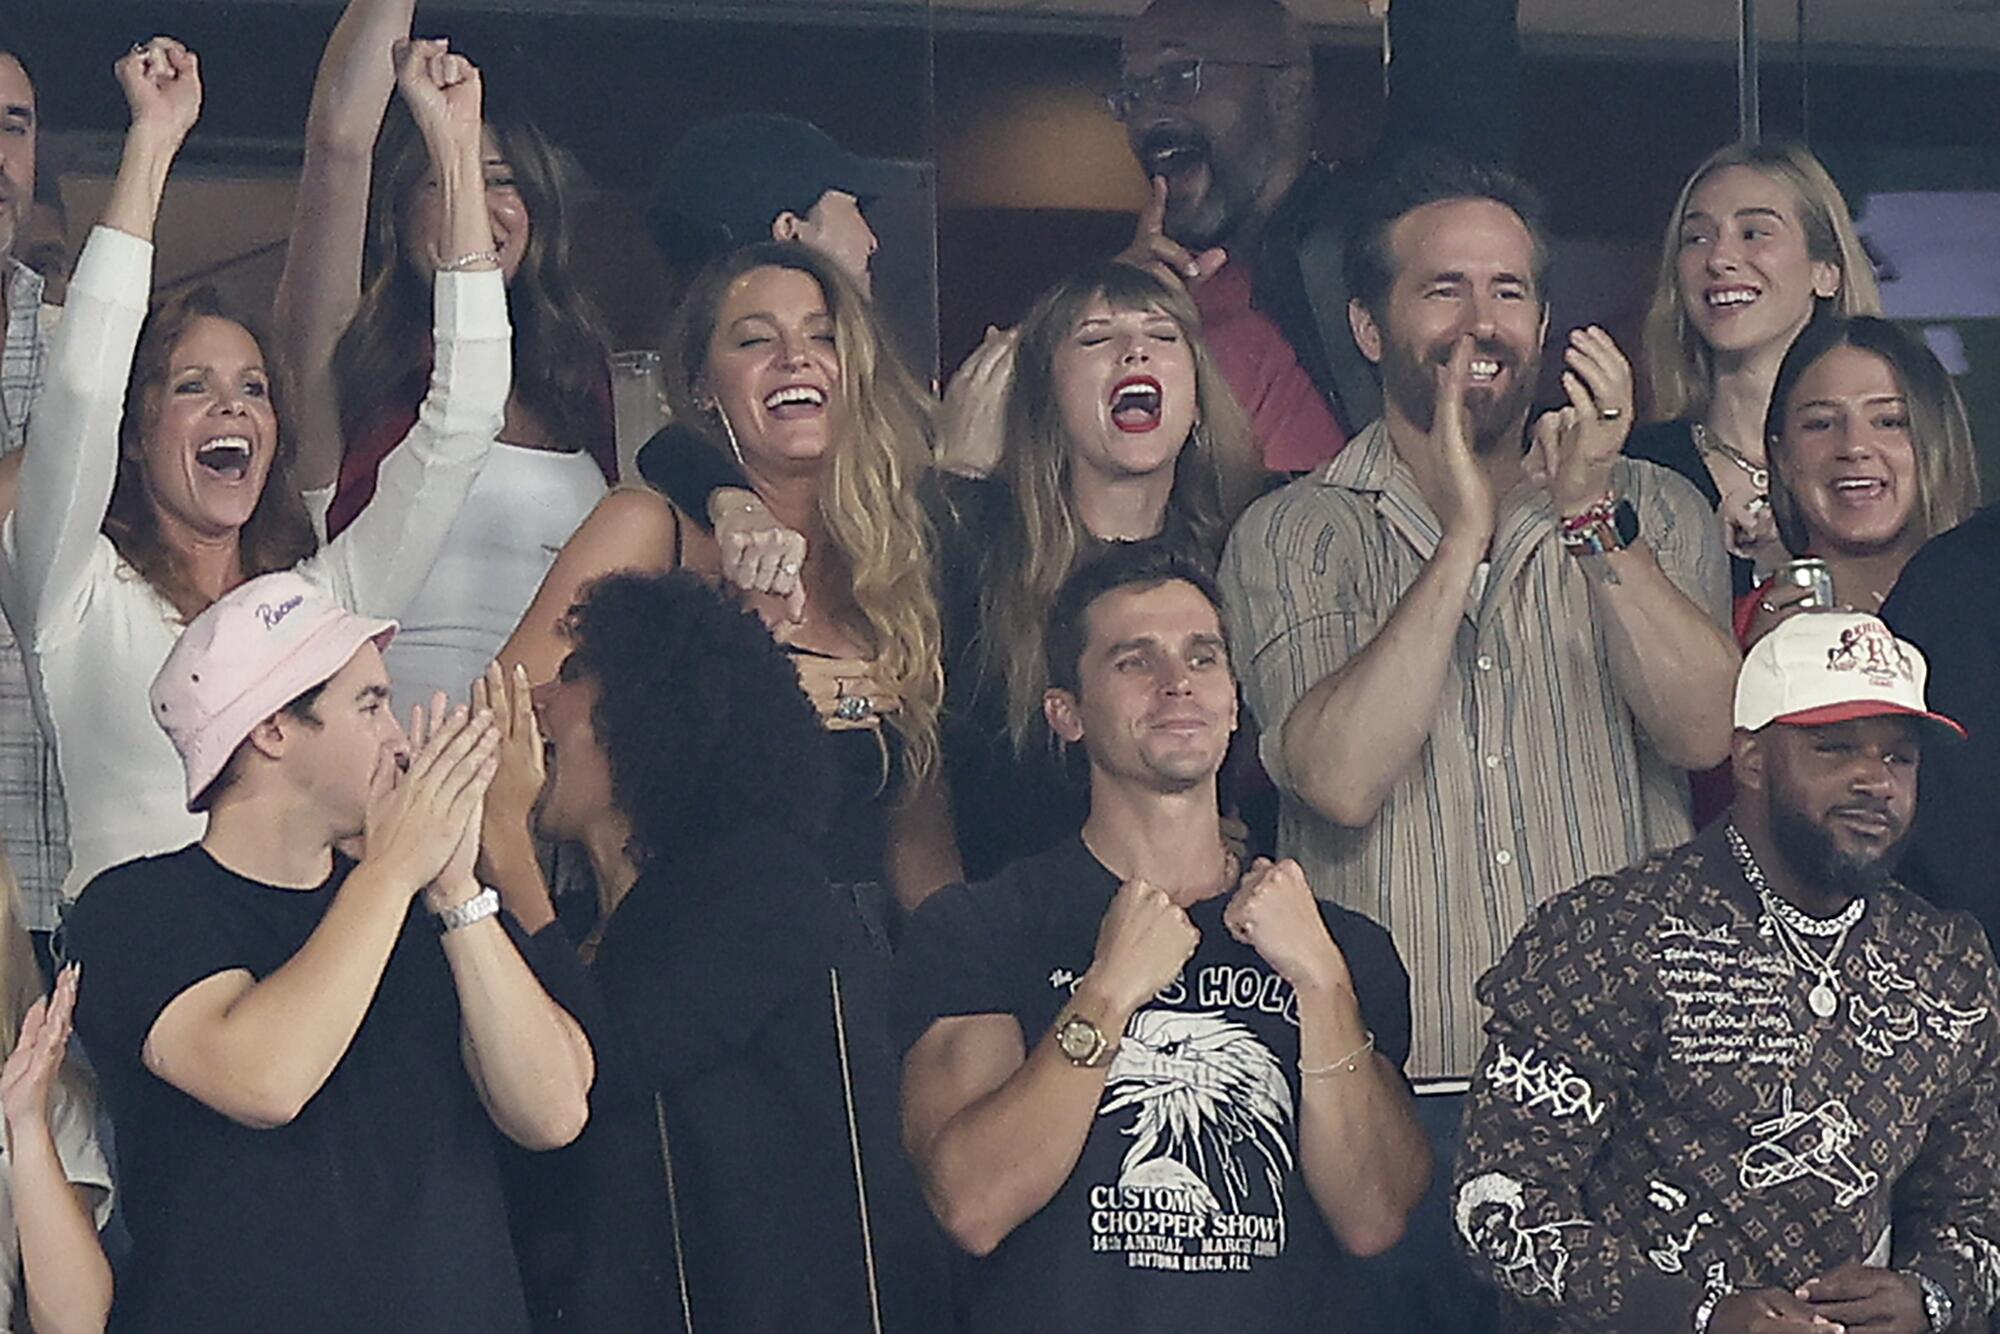 Taylor Swift, top center, Blake Lively, second from left, and Ryan Reynolds, react during an NFL football game.